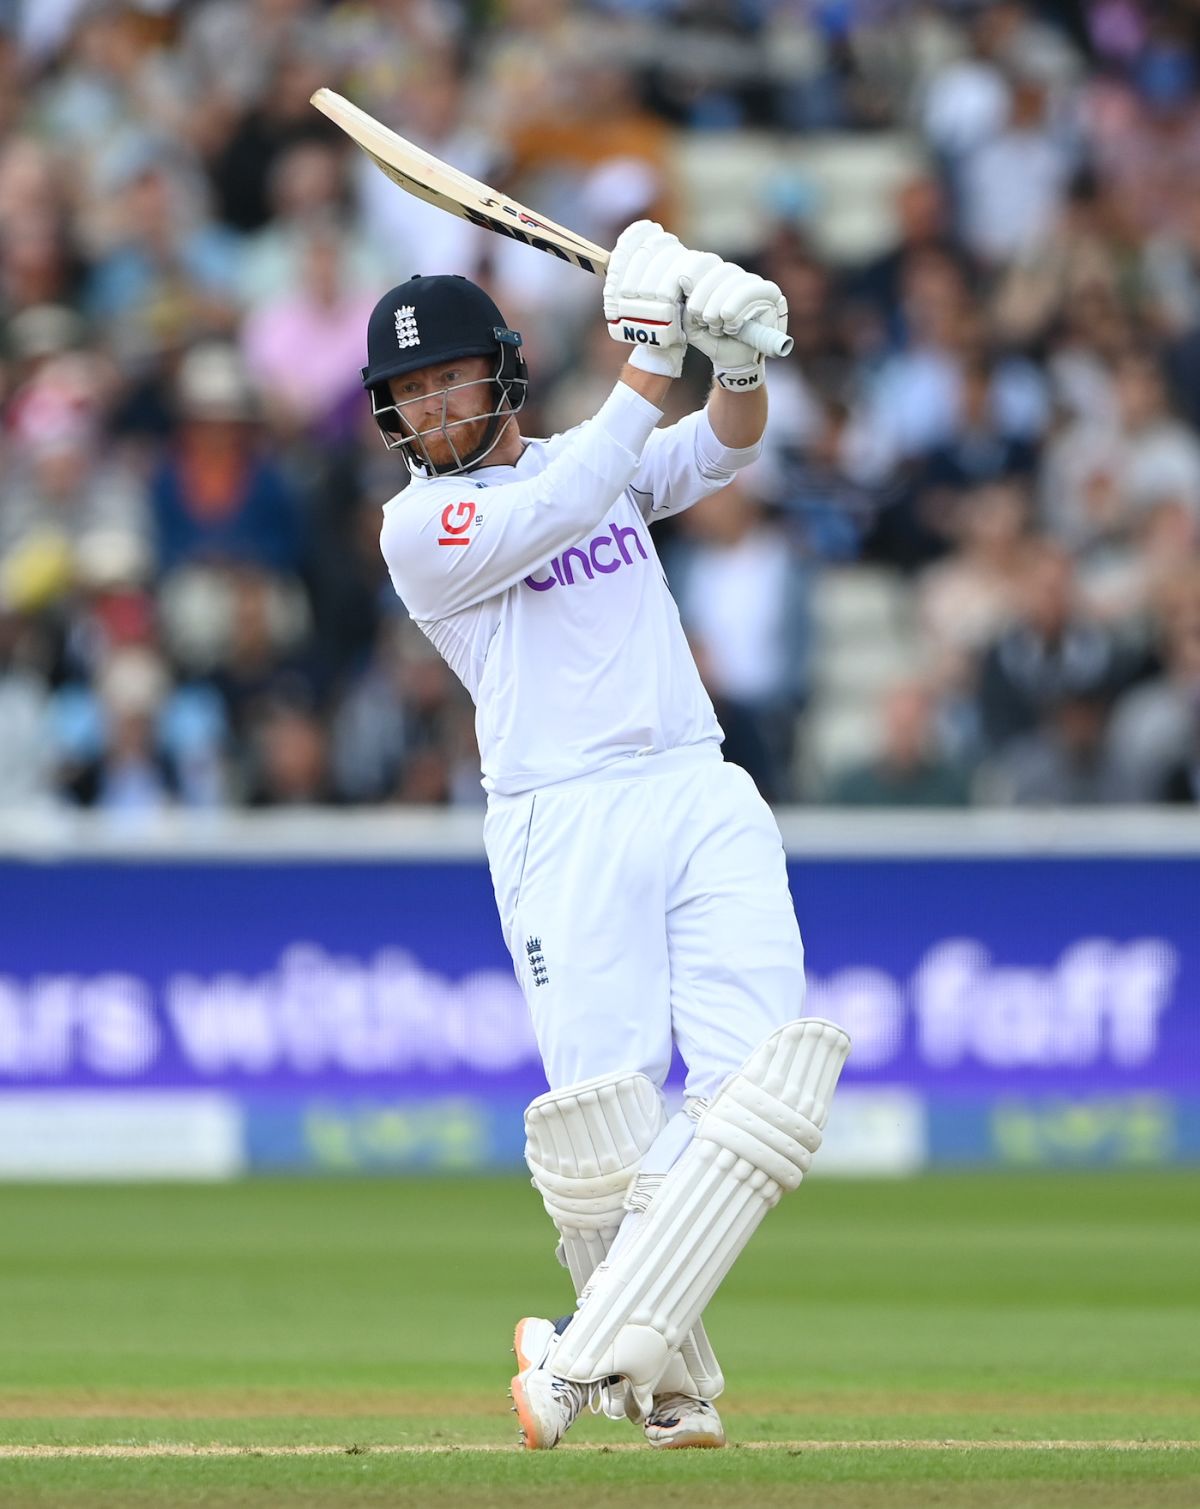 Jonny Bairstow holds his shape after completing a shot with panache, England vs India, 5th Test, Birmingham, 3rd Day, July 3, 2022
